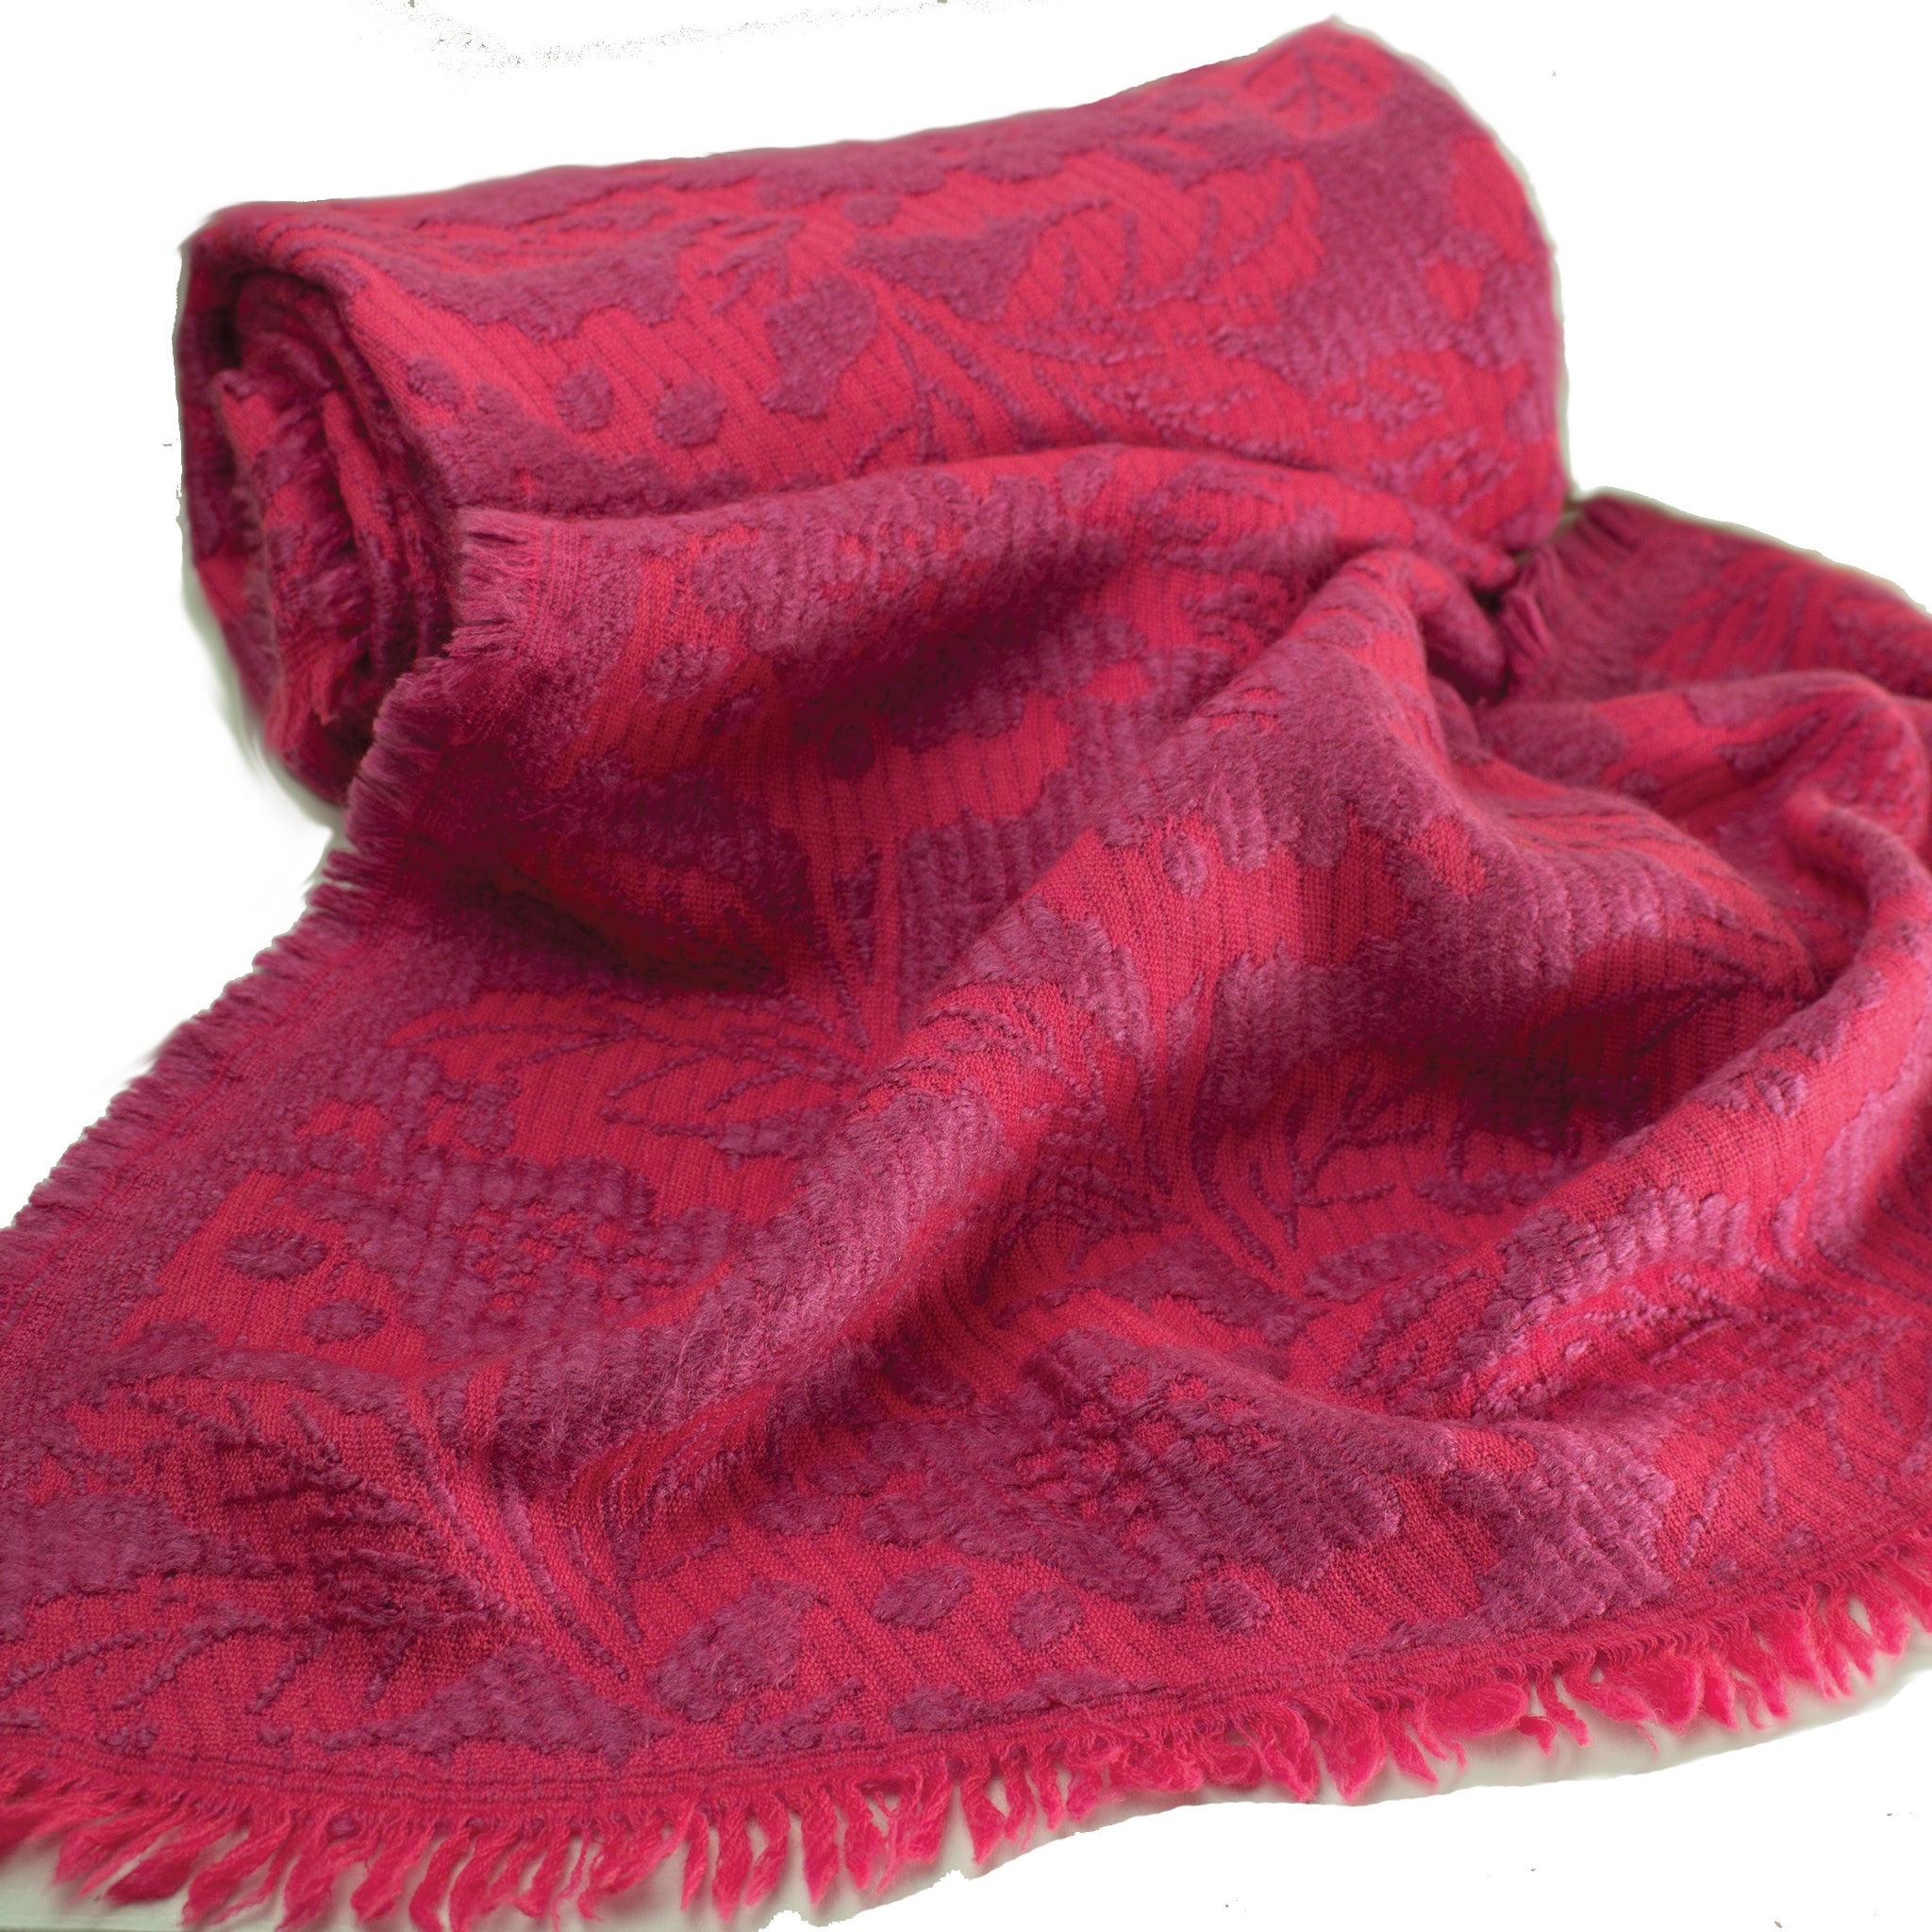 ne Quittez pas - Pink wrap / throw with lavender soft brocade Wool